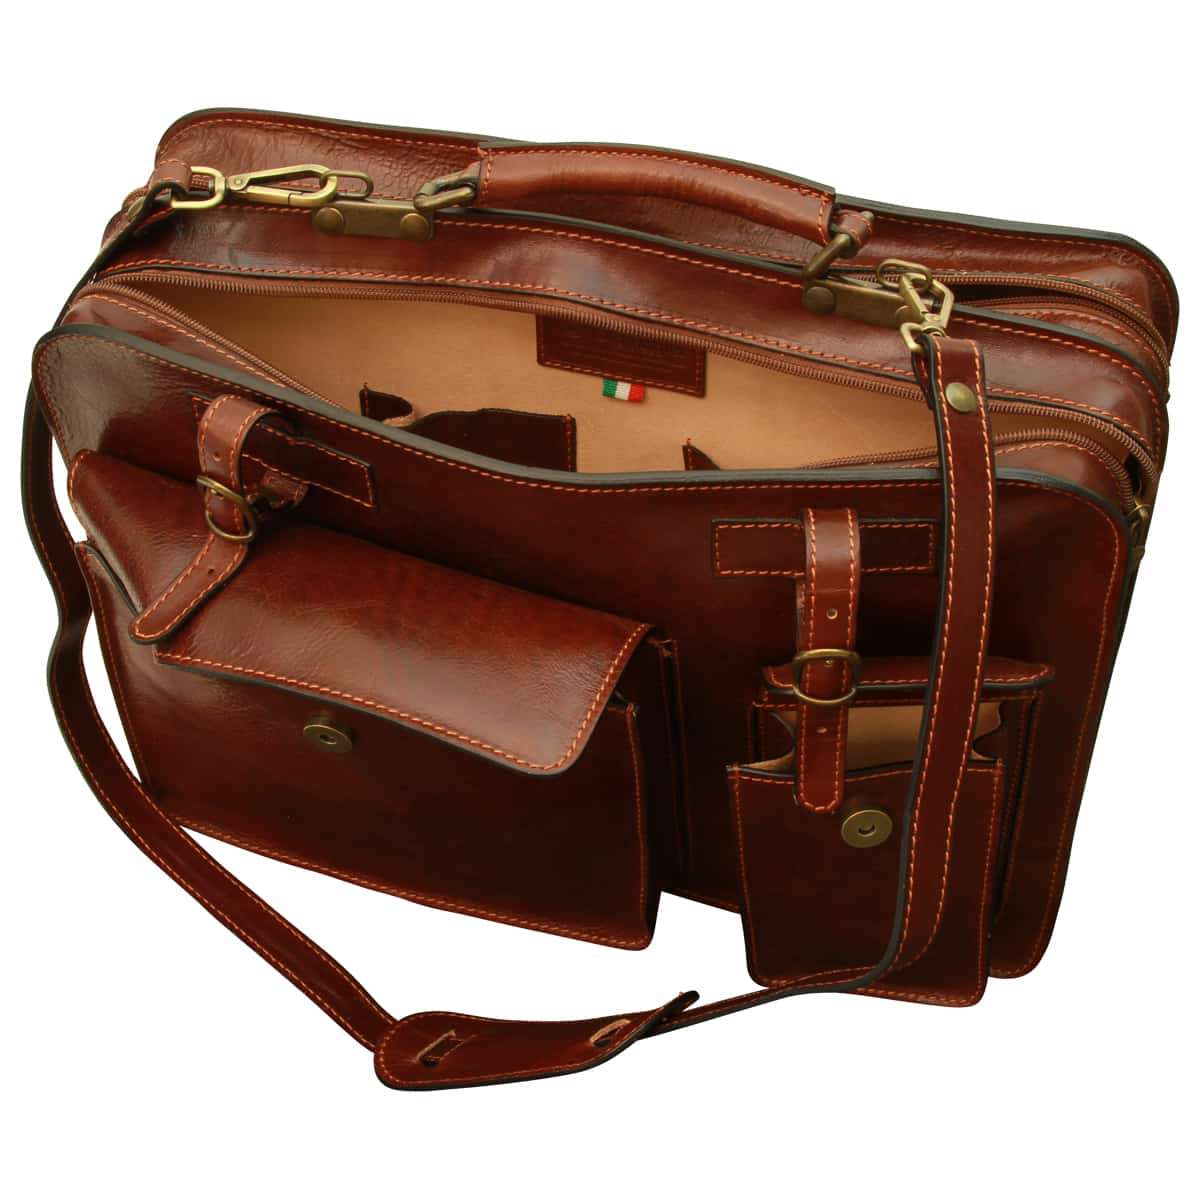 Leather Briefcase with belt straps - Brown | 006205MA US | Old Angler Firenze